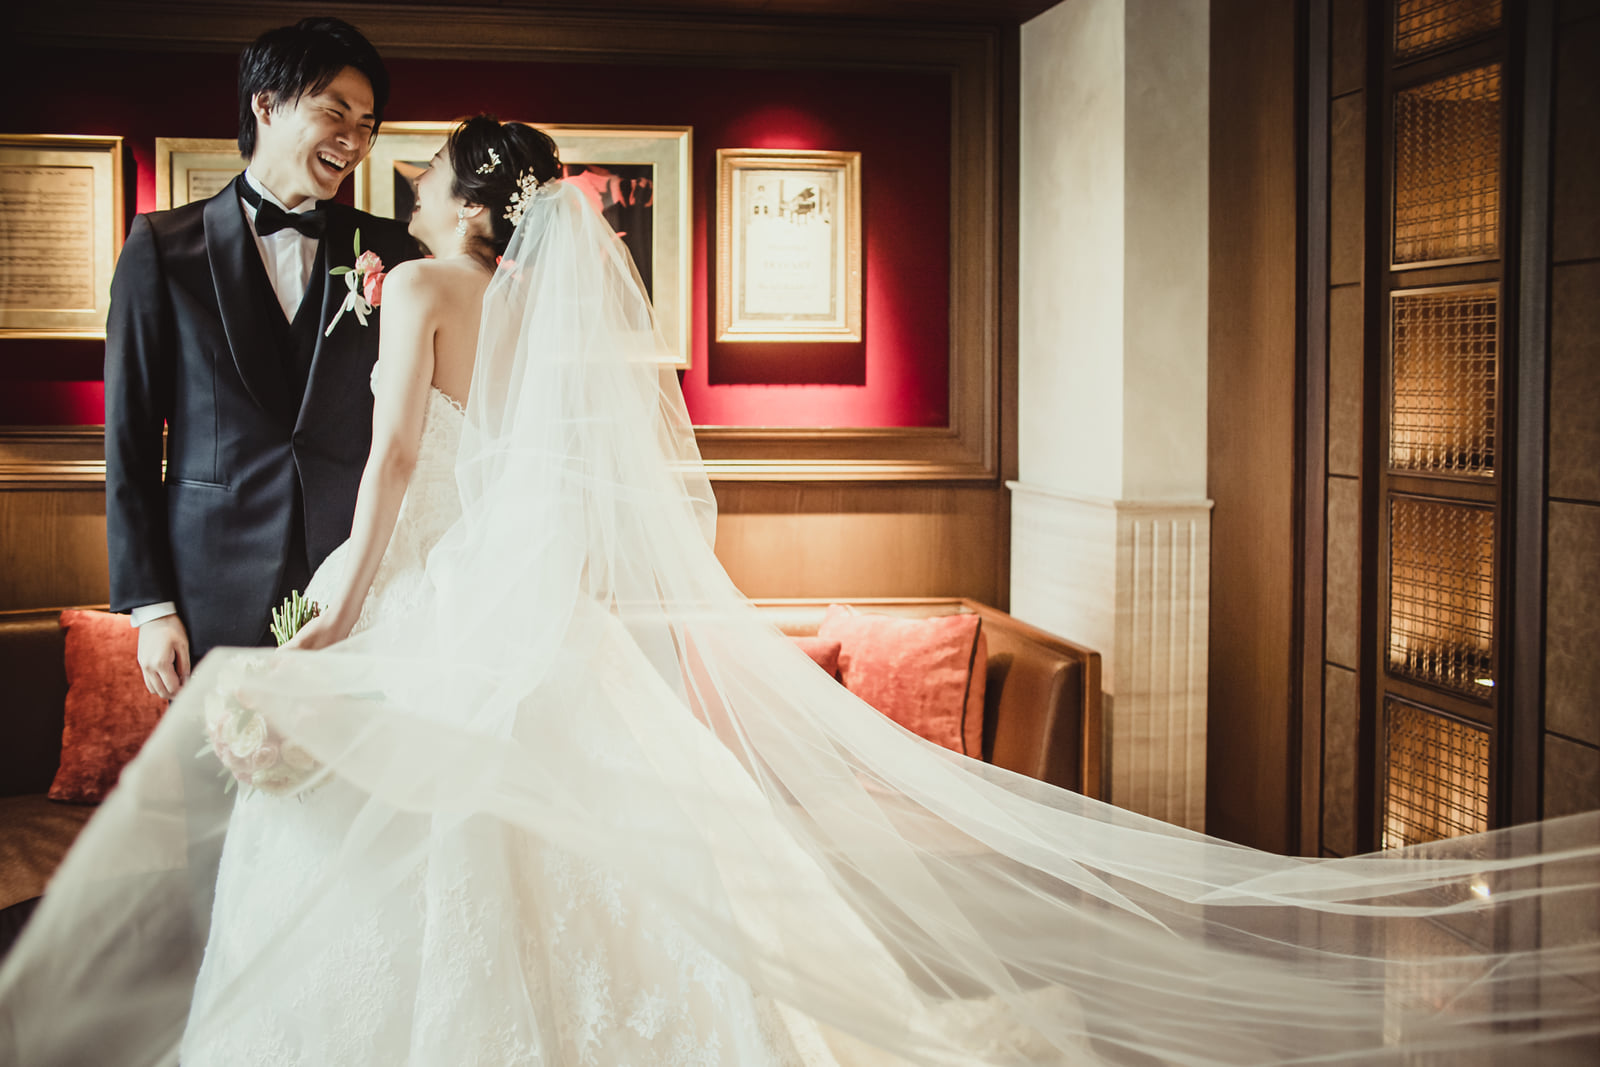 MASAKI&SAYAKA [Summer Wedding] A wedding to express our gratitude to the guests who took care of us